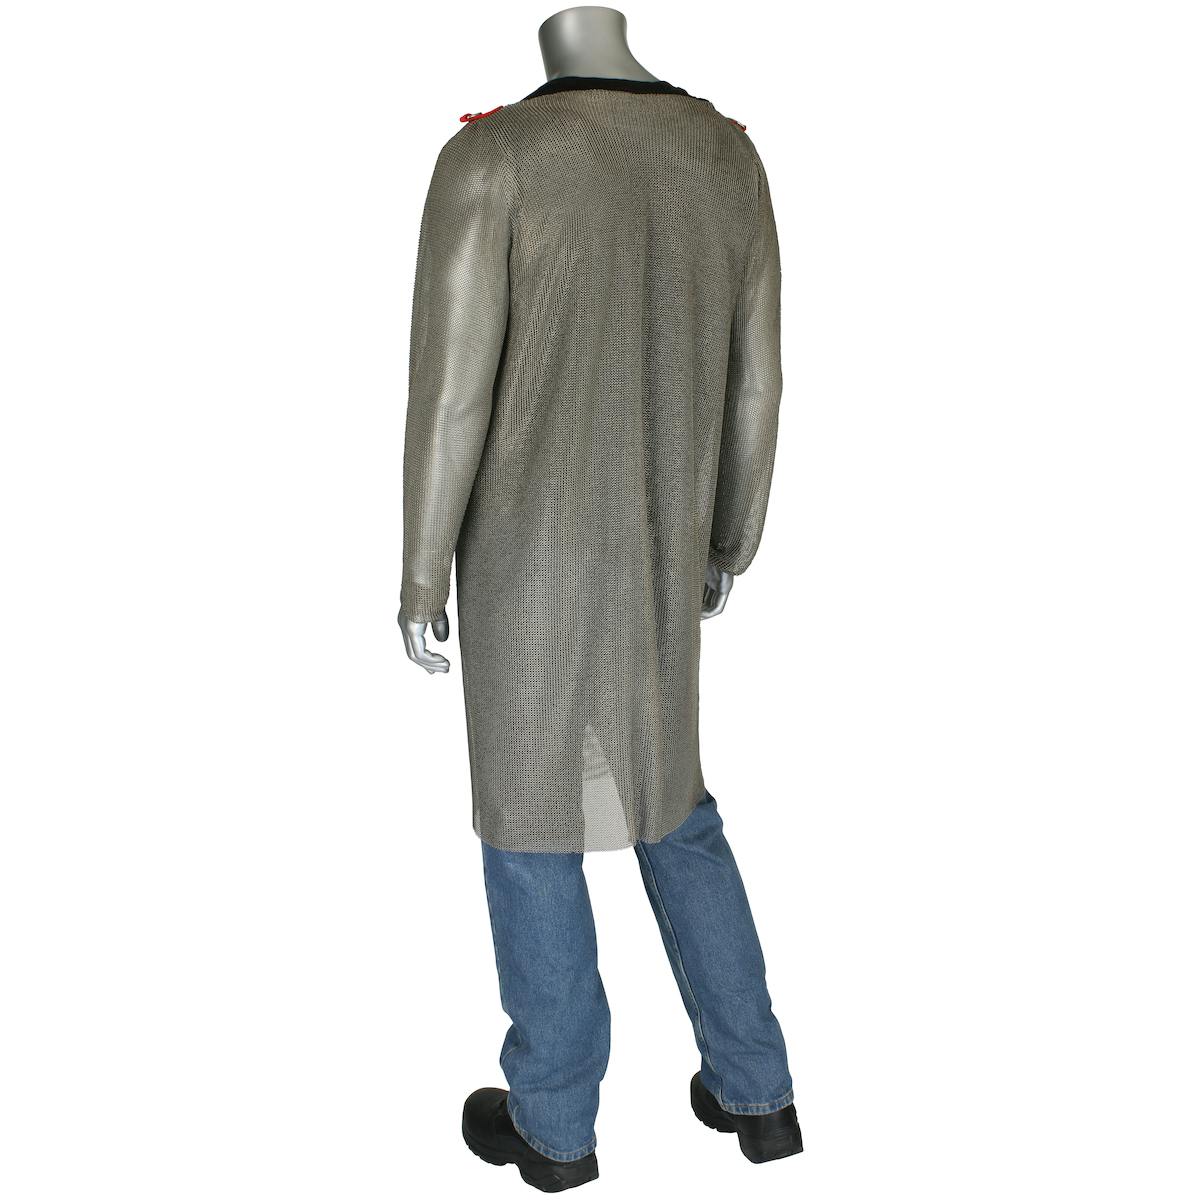 Titanium Wire Ring Mesh Full Body Tunic with Sleeves, Silver (USM-4301TI)